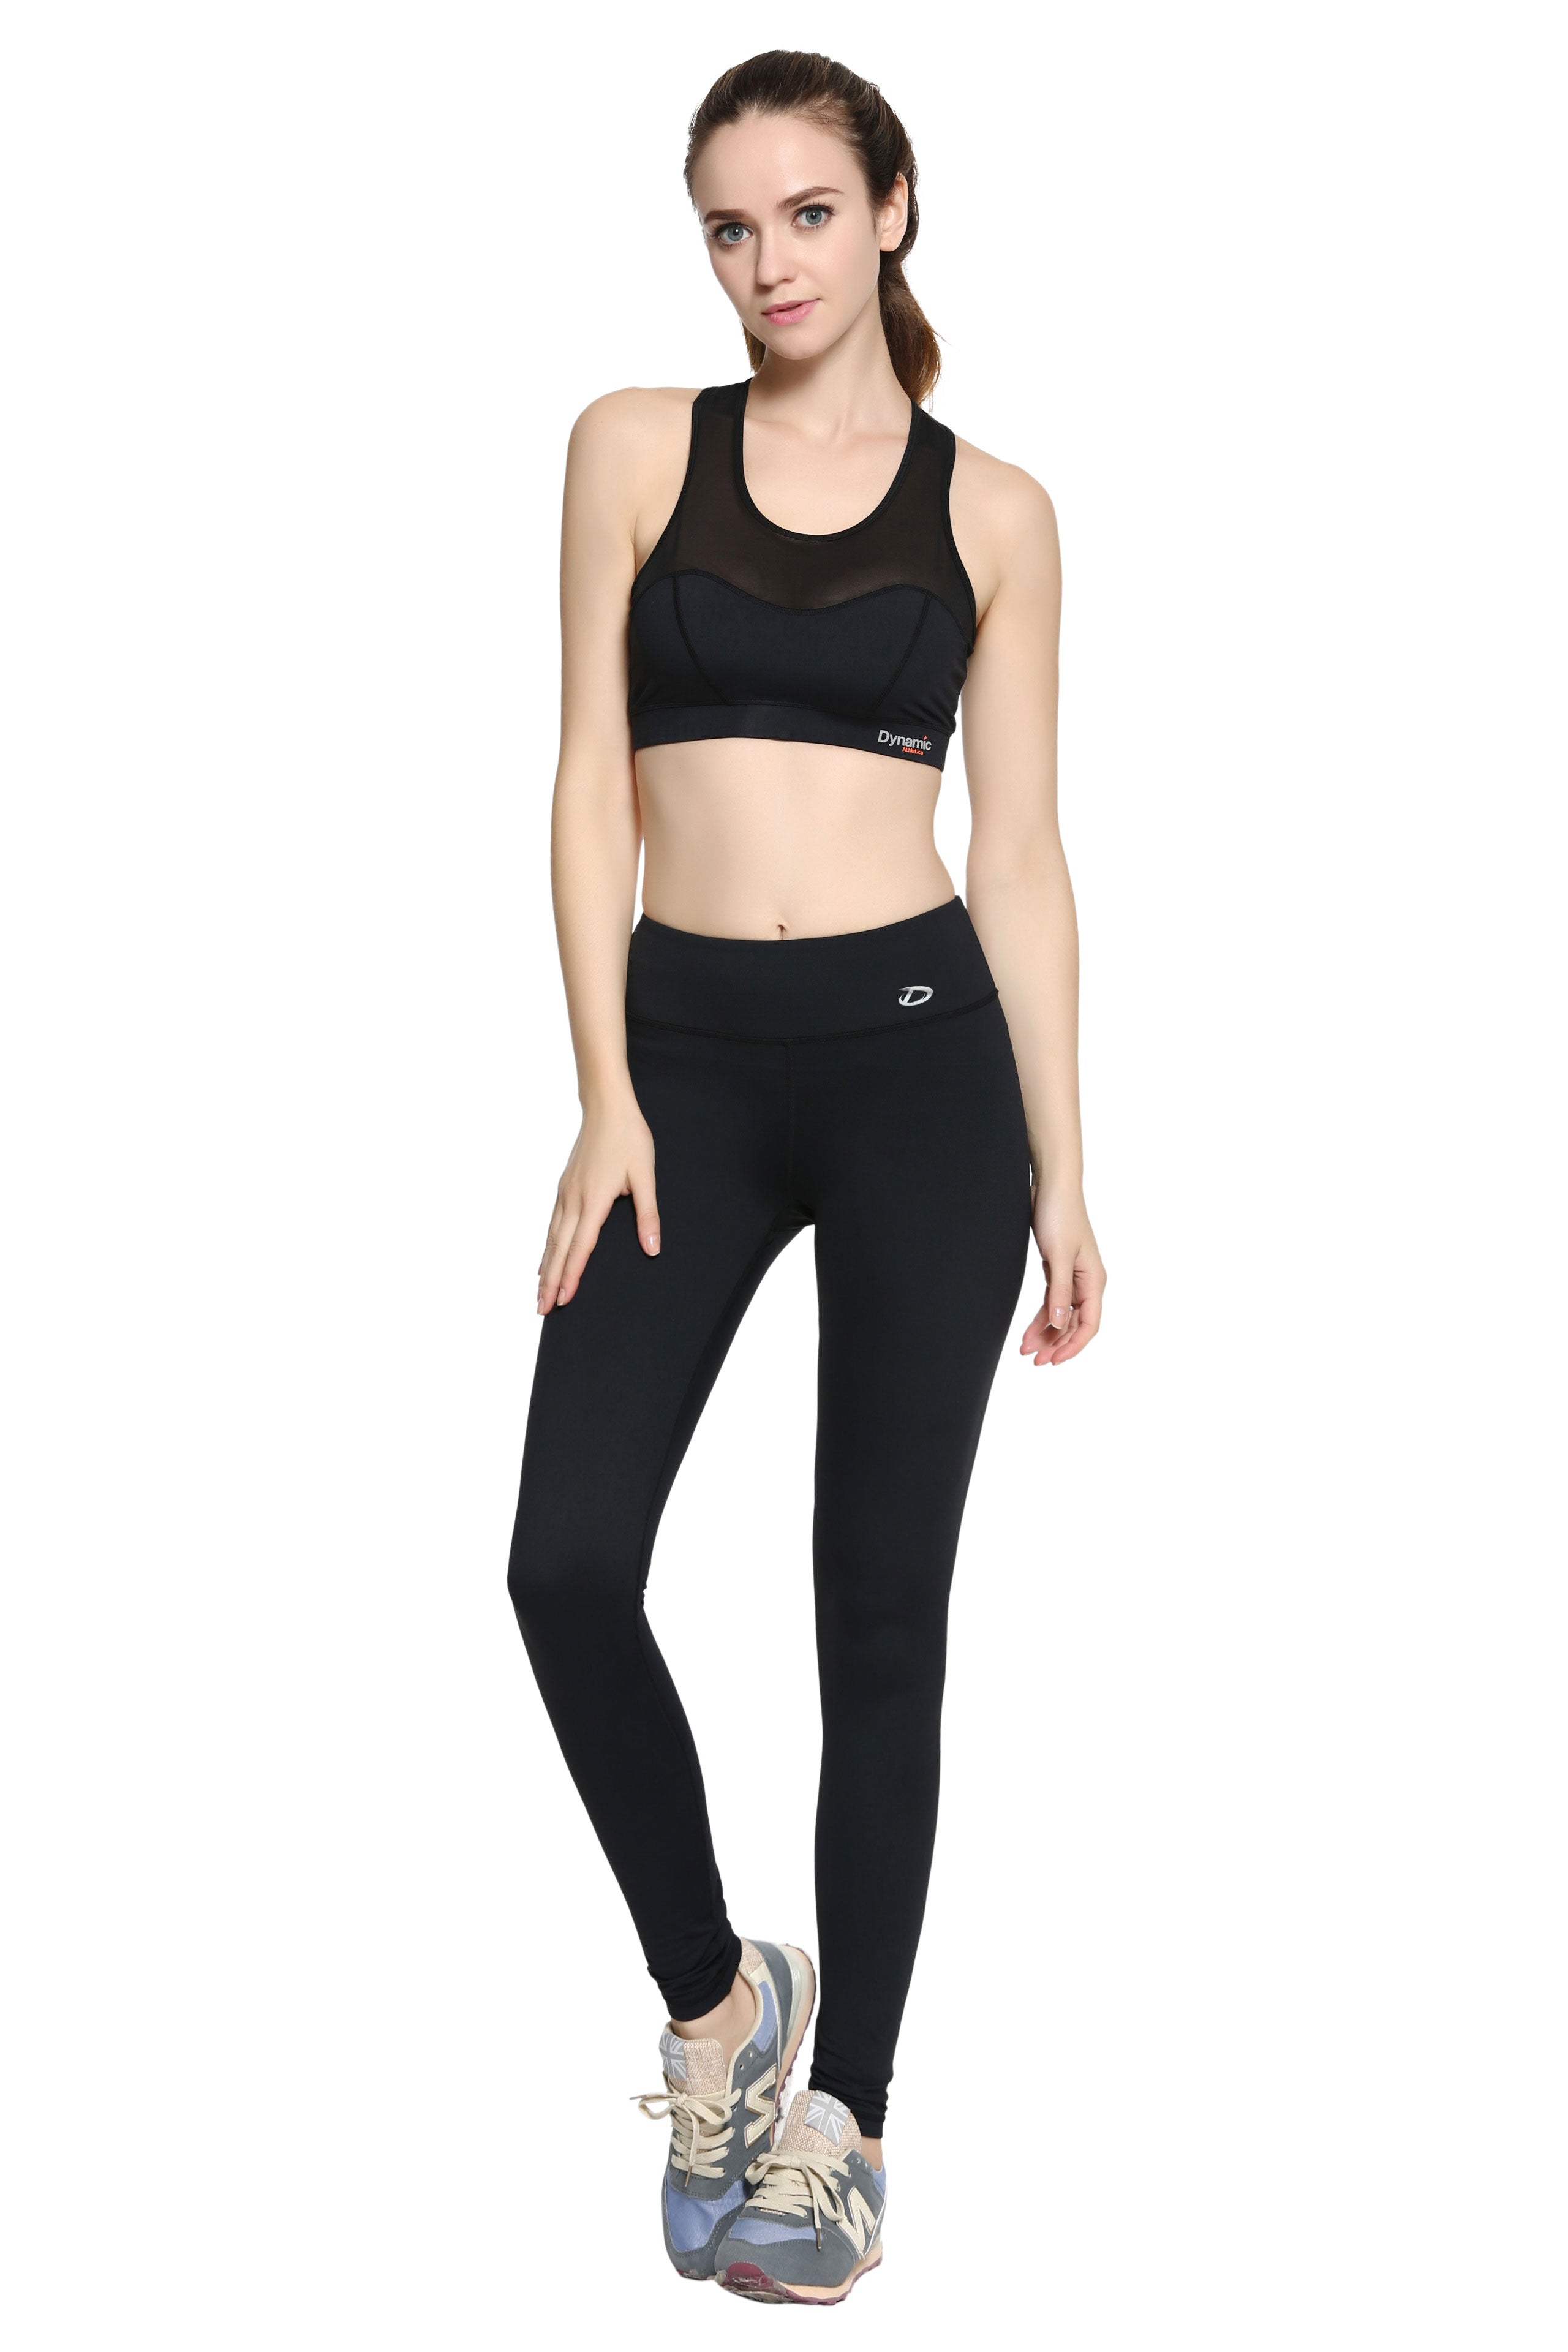 WOMENS COMPRESSION PANTS - Dynamic Athletica